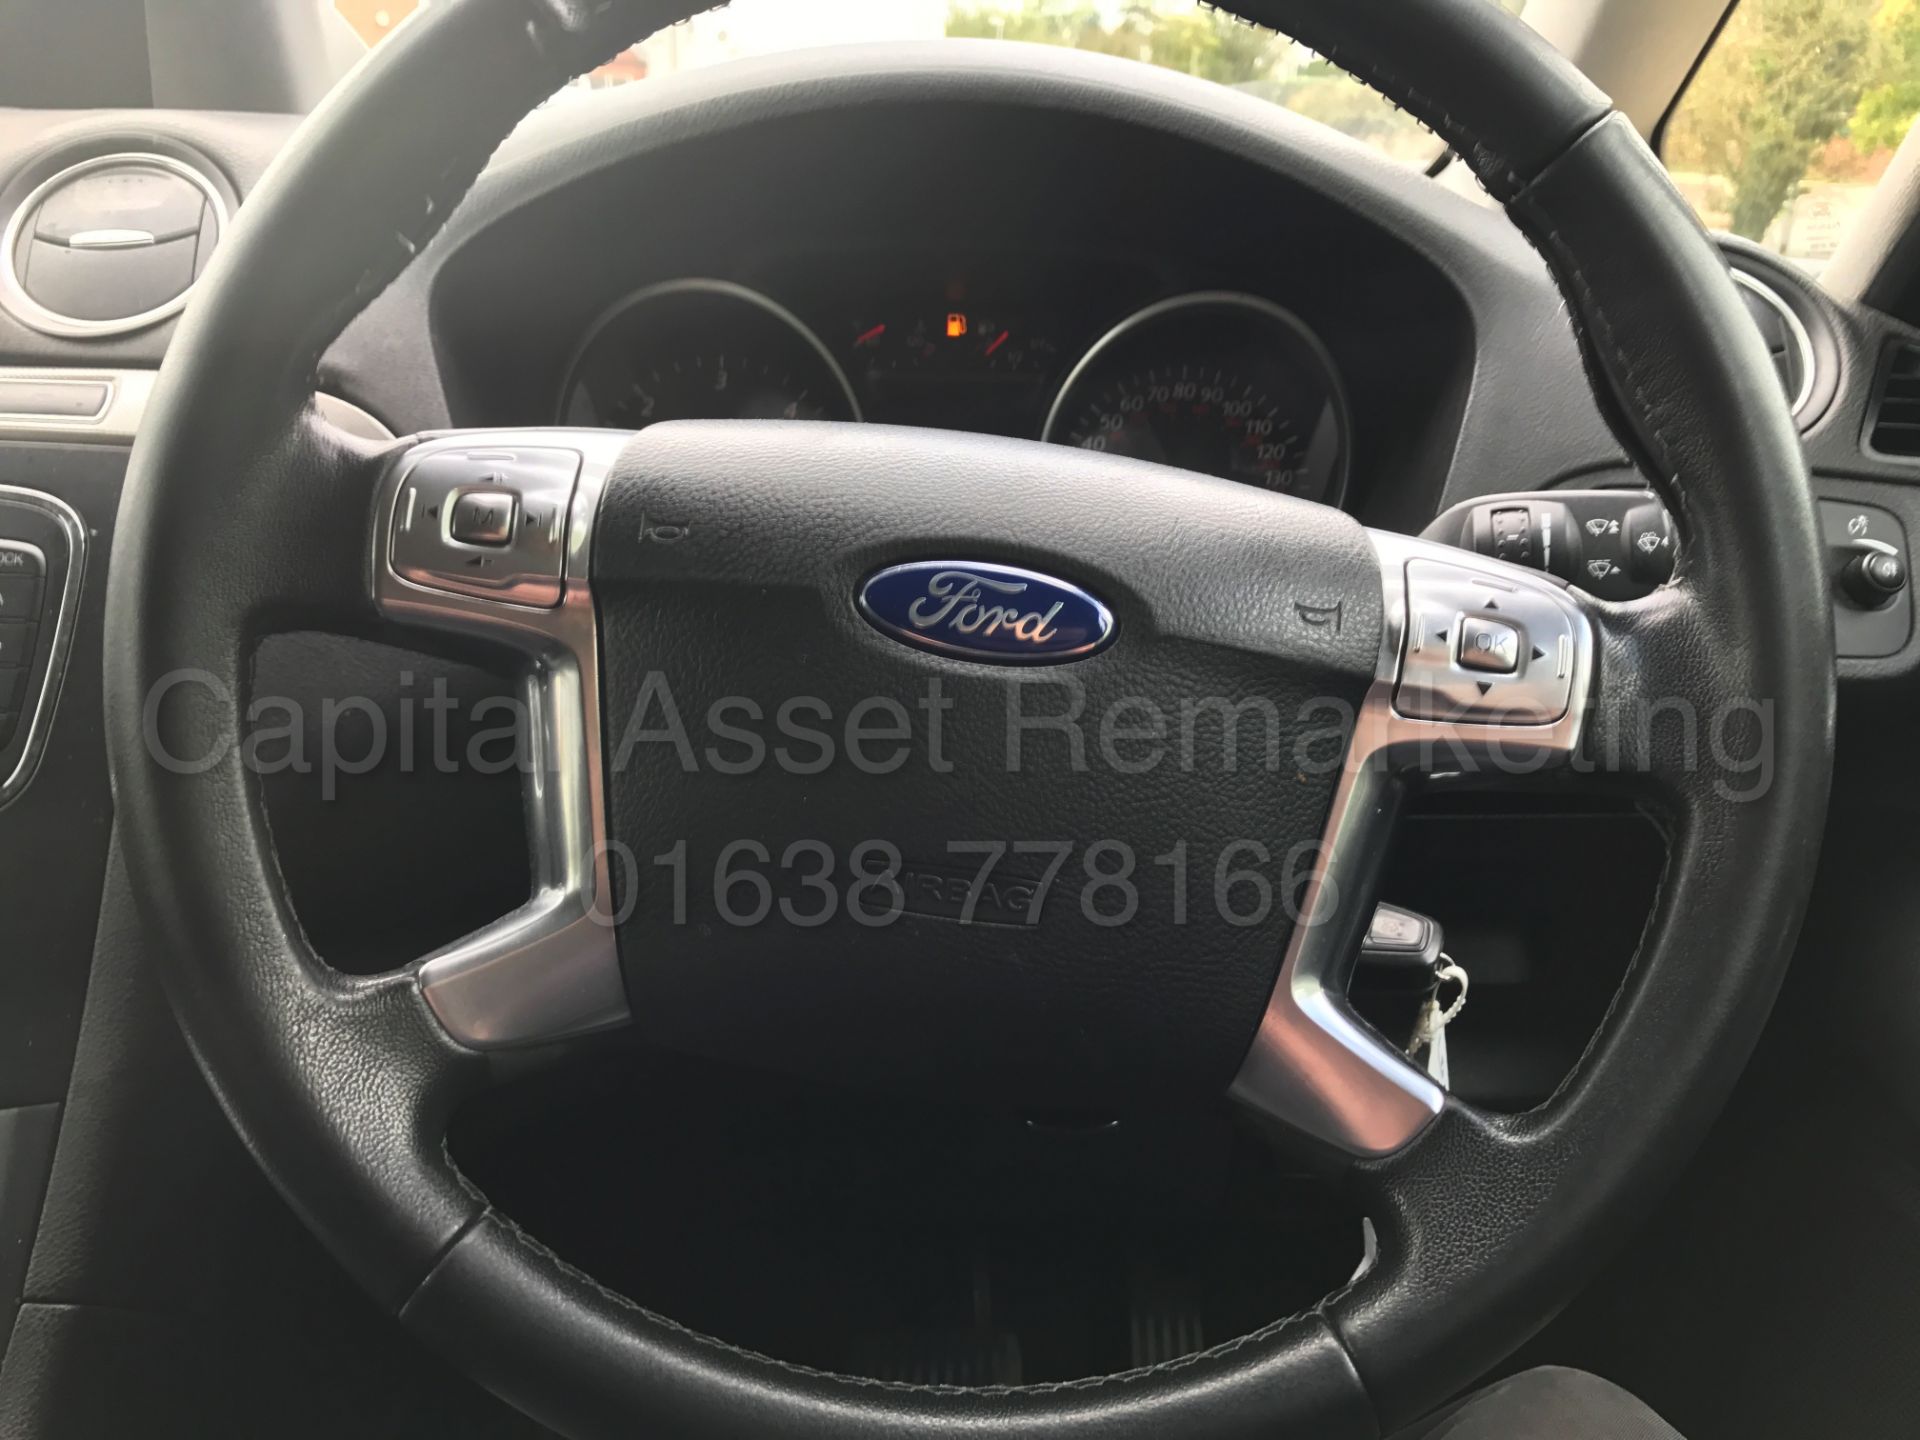 FORD GALAXY 'ZETEC' 7 SEATER MPV (2014 MODEL) '2.0 TDCI - 140 BHP - POWER SHIFT' (1 OWNER FROM NEW) - Image 25 of 27